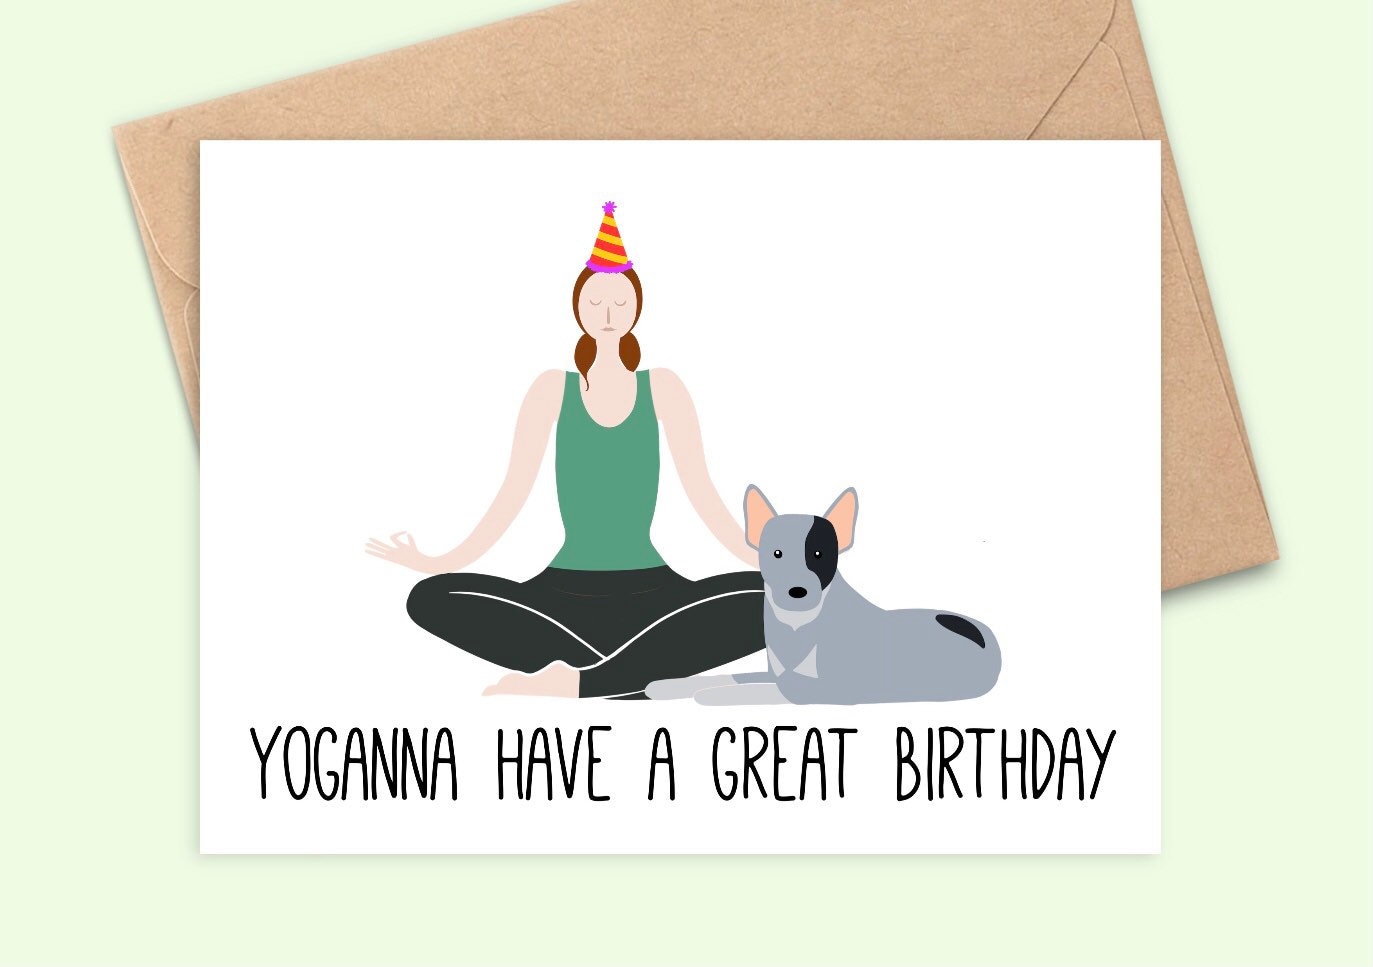 Yoganna Have A Great Birthday Yoga With Adriene Inspired Greetings Card  Handmade A6 Recyclable 